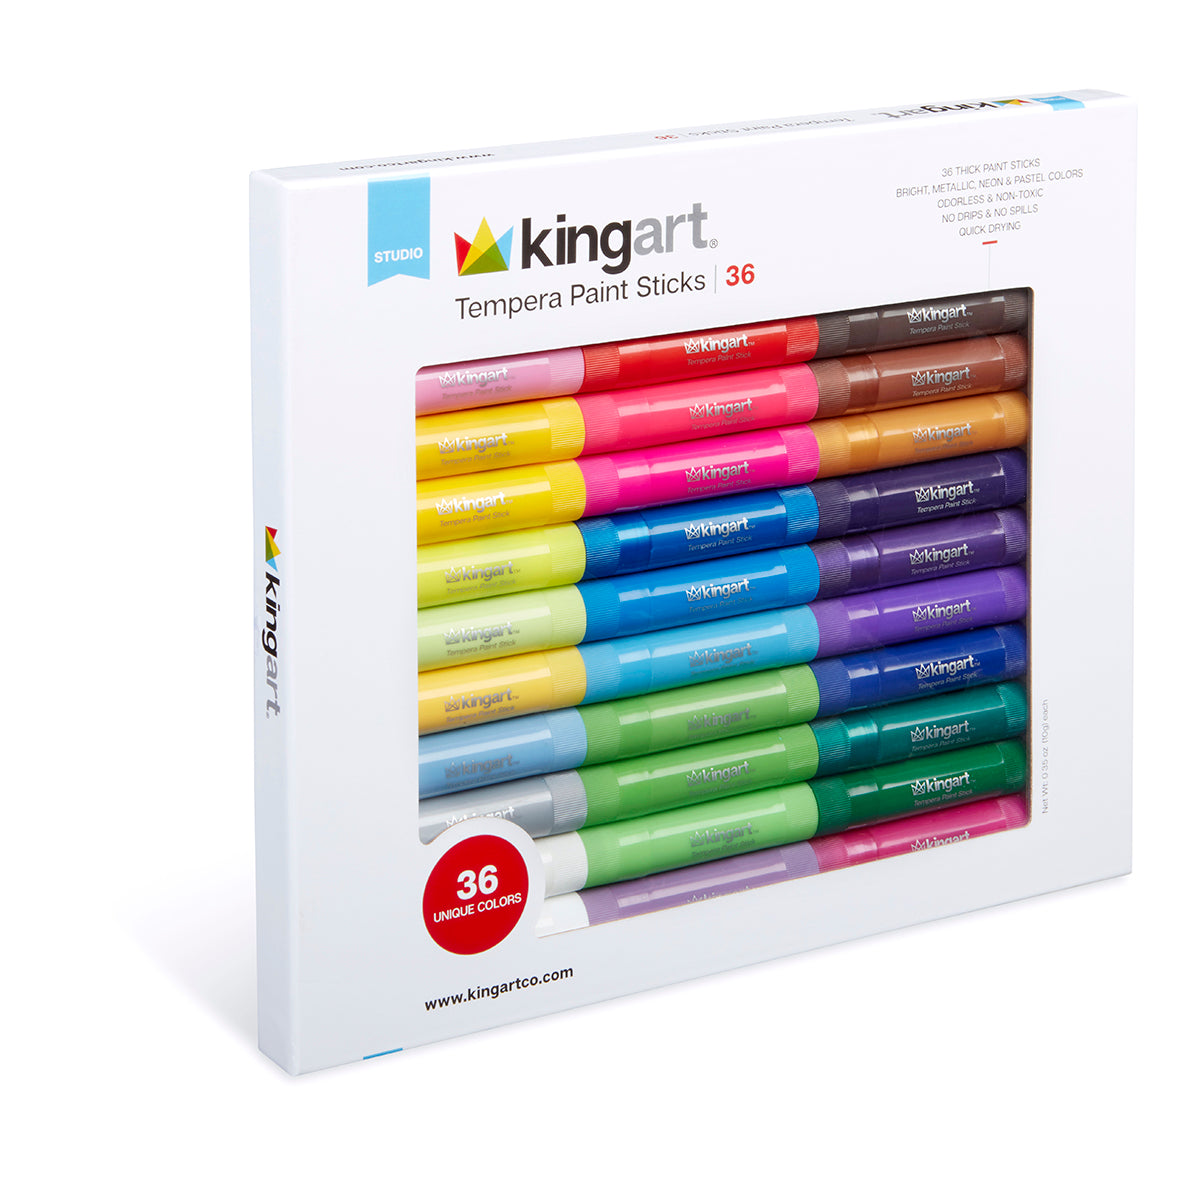 KINGART® Tempera Paint Thin Sticks, 24 Vibrant Colors Solid Tempera Paint  for Kids, Super Quick Drying, Works Great on Paper Wood Glass Ceramic Canvas